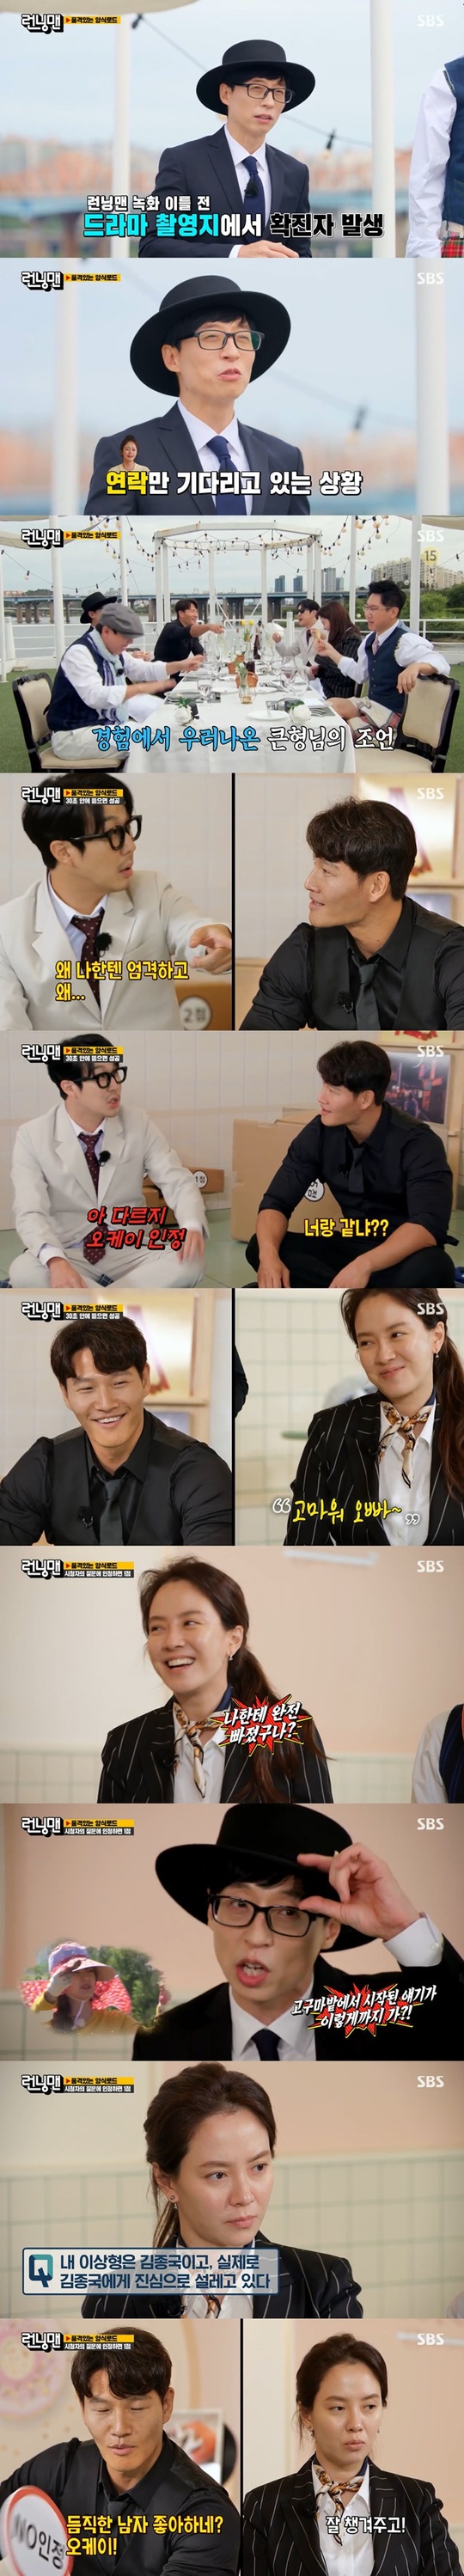 Kim Jong-kook and Song Ji-hyo admitted the love line.On SBS Running Man, which was broadcast on October 10, the members of the Italian ladies and ladies I Musici style Lorde race was held.On this day, the members enjoyed a leisurely time enjoying the full course of the form on the ship. Jeon So-min did not attend the recording due to the corona 19 confirmed on the filming site of Drama.The members spent a happy time enjoying the Iberico bone sirloin with their regrets behind.Todays Race is decorated with I Musici-style Lorde and should eat creamy and damp food with every round butter, cream and cheese flavor.Two of them, who have a lot of product badges, win the penalty, and one person who picked the penalty ball wins the penalty.If you leave food, you will be added a penalty ball, but you can enjoy a Korean meal instead of a style through a pregame.Before the first menu doughnut, the members challenged to open the courier box in 30 seconds; Yang Se-chan easily opened the courier with an unexpected front teeth skill.Haha, who saw this, admired it as a wild mouse; then Song Ji-hyo failed to commission it with a relaxed courier ripping; Kim Jong-kook, who saw it, was good.Haha said, Why is Ji Hyo okay? Yoo Jae-Suk, who saw this, set fire to the love line, saying, The end is trying to die because it is cute.Also, when Kim Jong-kook responded, Do you like you? Haha nodded, Oh different. Okay, acknowledgment.The next Game was a mission to admit to the questions of viewers.Asked Kim Jong-kook, I really think Song Ji-hyo is going to die of cuteness, he replied, Cute. I was surprised when I was Rolin. Why are you so cute these days?So Song Ji-hyo quipped, Are you completely into me? The next question was, I actually dated the cast I met at Entertainment.Yoo Jae-Suk, who heard this, said, Is this Yoon Eun-hye asking?Troubling questions have also been poured into Yoo Jae-Suk.Yoo Jae-Suk said, I acknowledge all of my body secrets that were often mentioned on the air. Jeon So-min talked about in the sweet potato field this big.No matter how much you do not, I will not be recognized.In addition, Yoo Jae-Suk shouted NO recognition about Running Man appearance ranking last place, saying, I do not know what is better than me even if I wash my eyes and look.